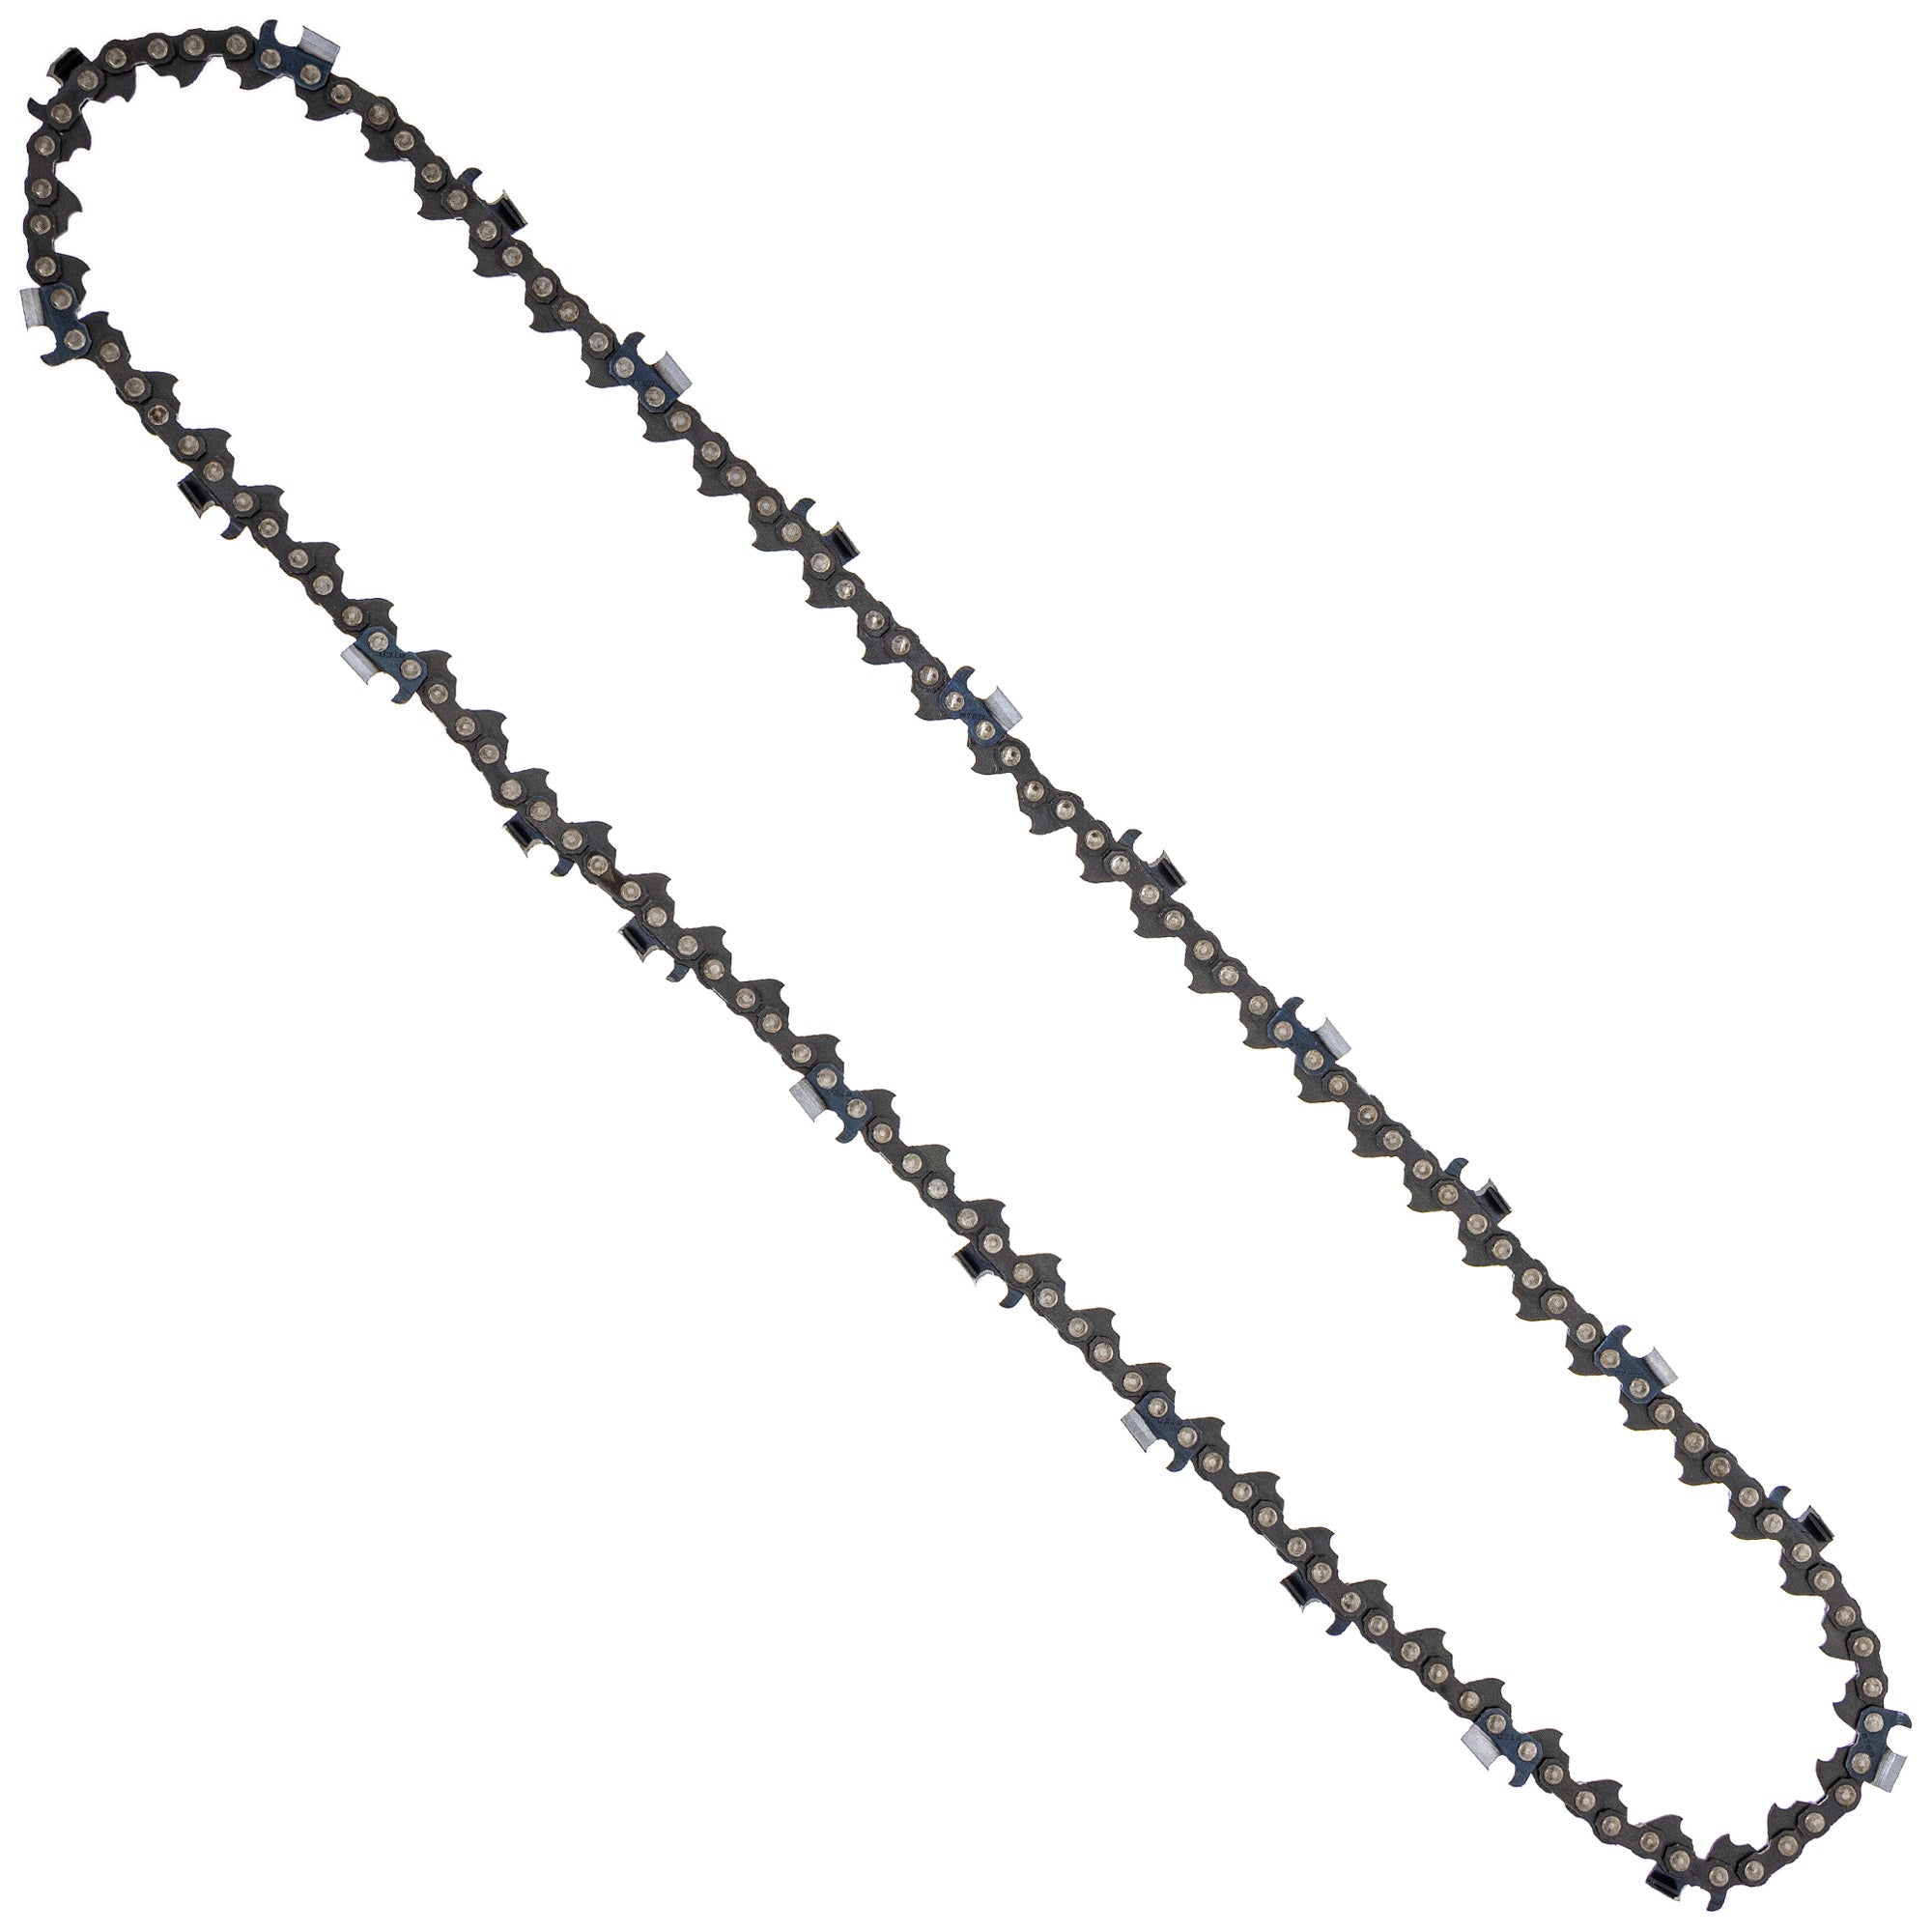 8TEN 810-CCC2392H Chain 5-Pack for zOTHER Oregon Husqvarna Poulan